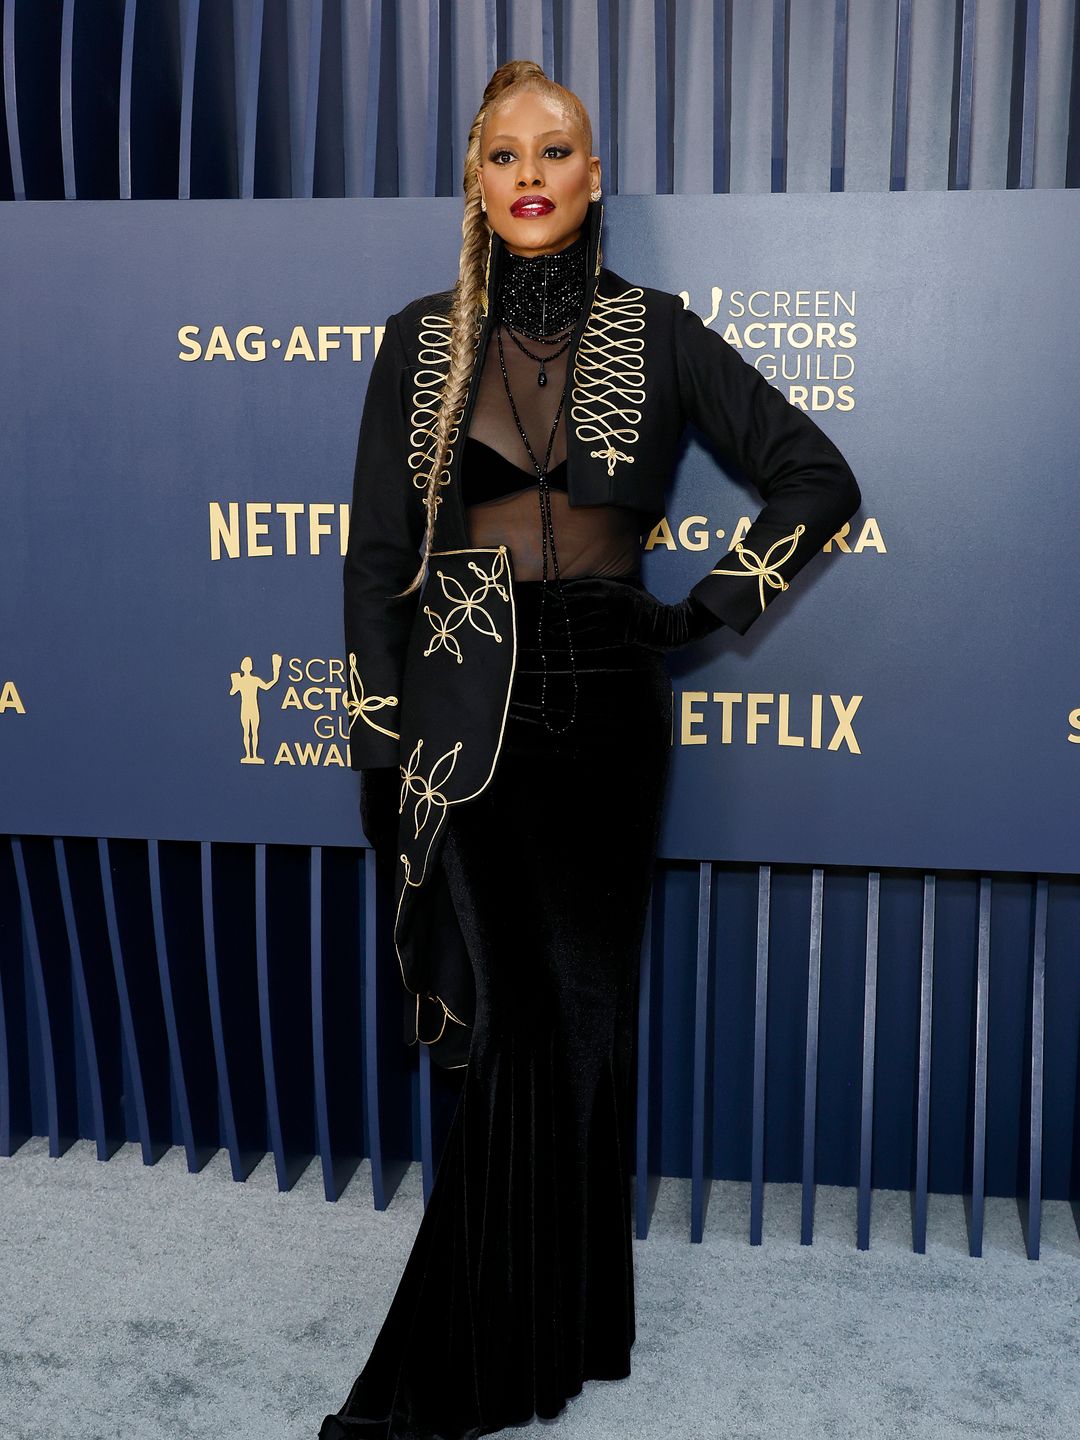 averne Cox attends the 30th Annual Screen Actors Guild Awards